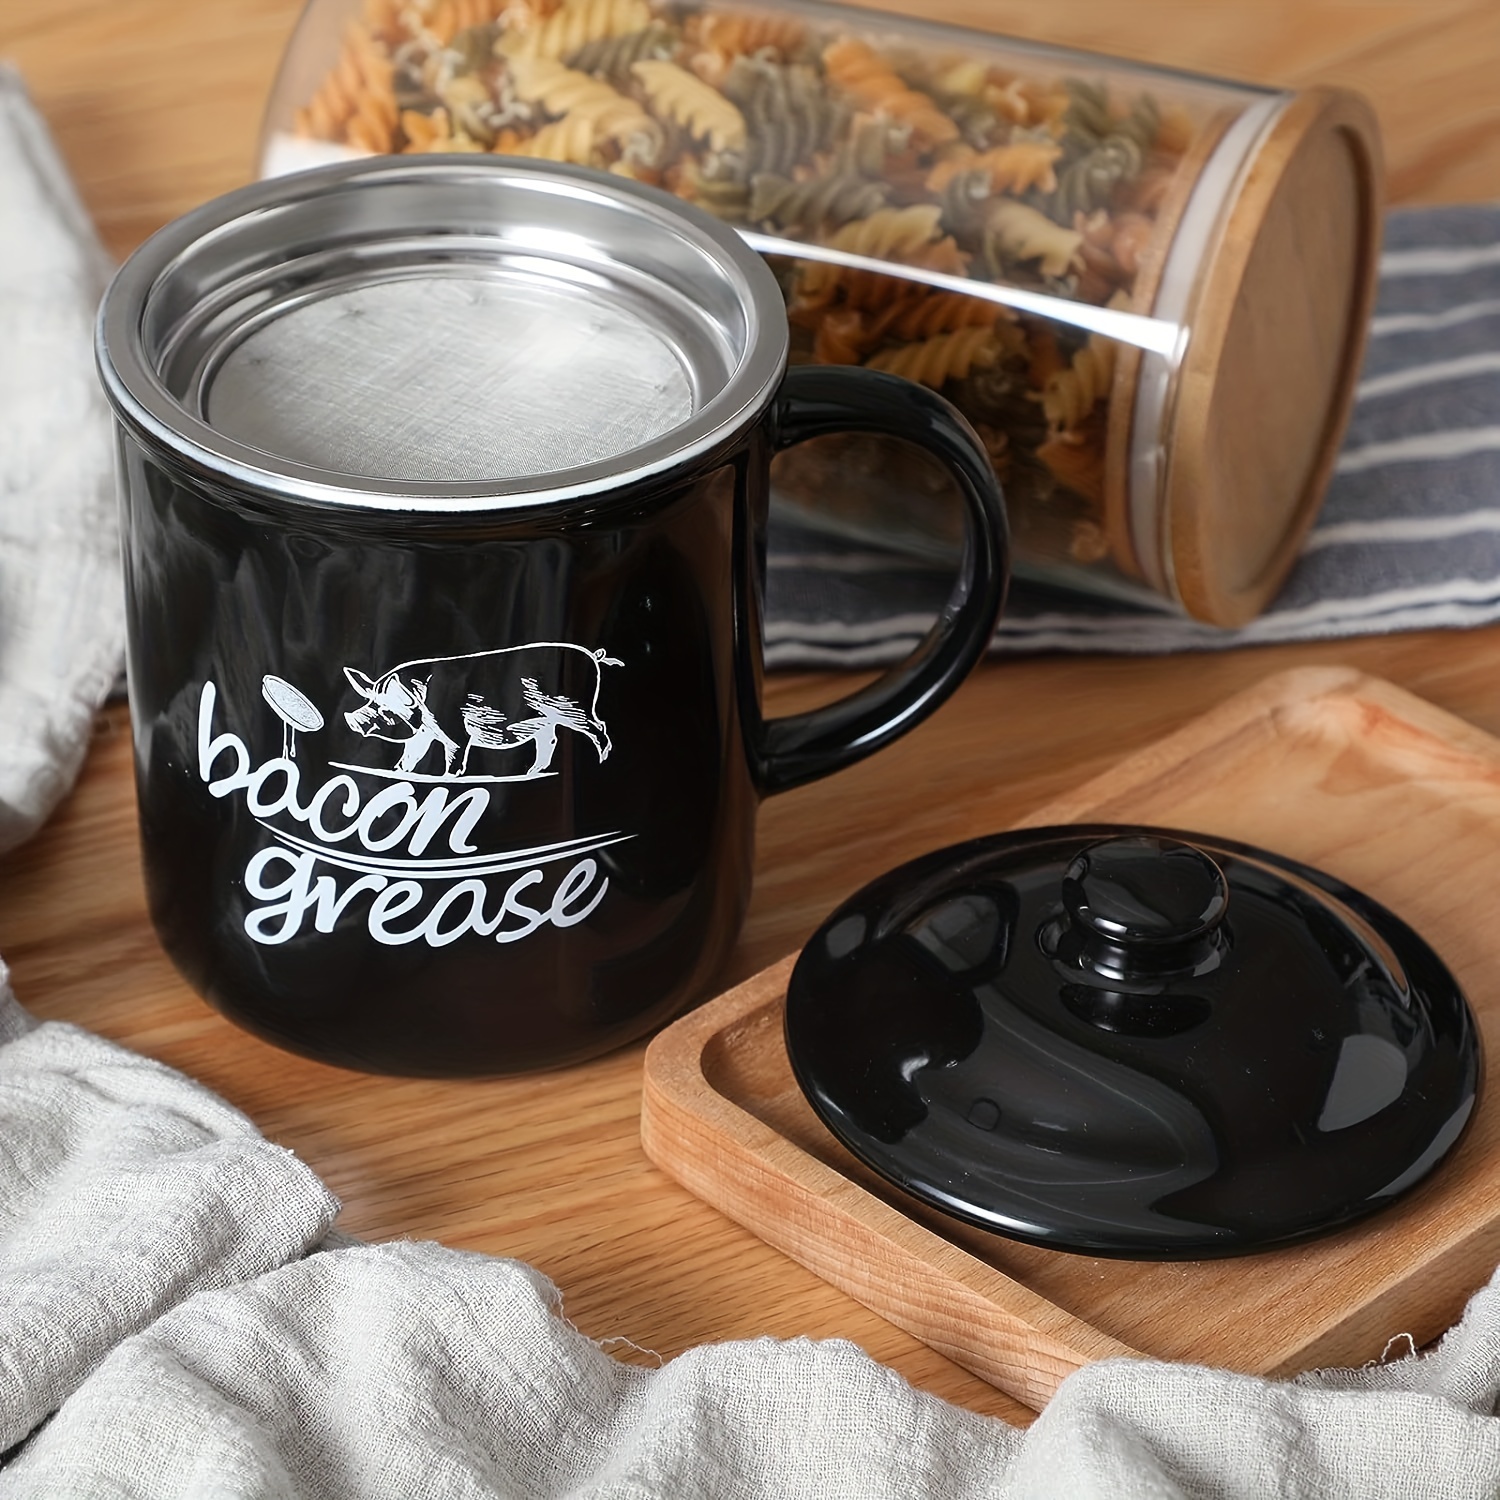 Ceramic Bacon Grease Container With Strainer And Lid, Bacon Grease